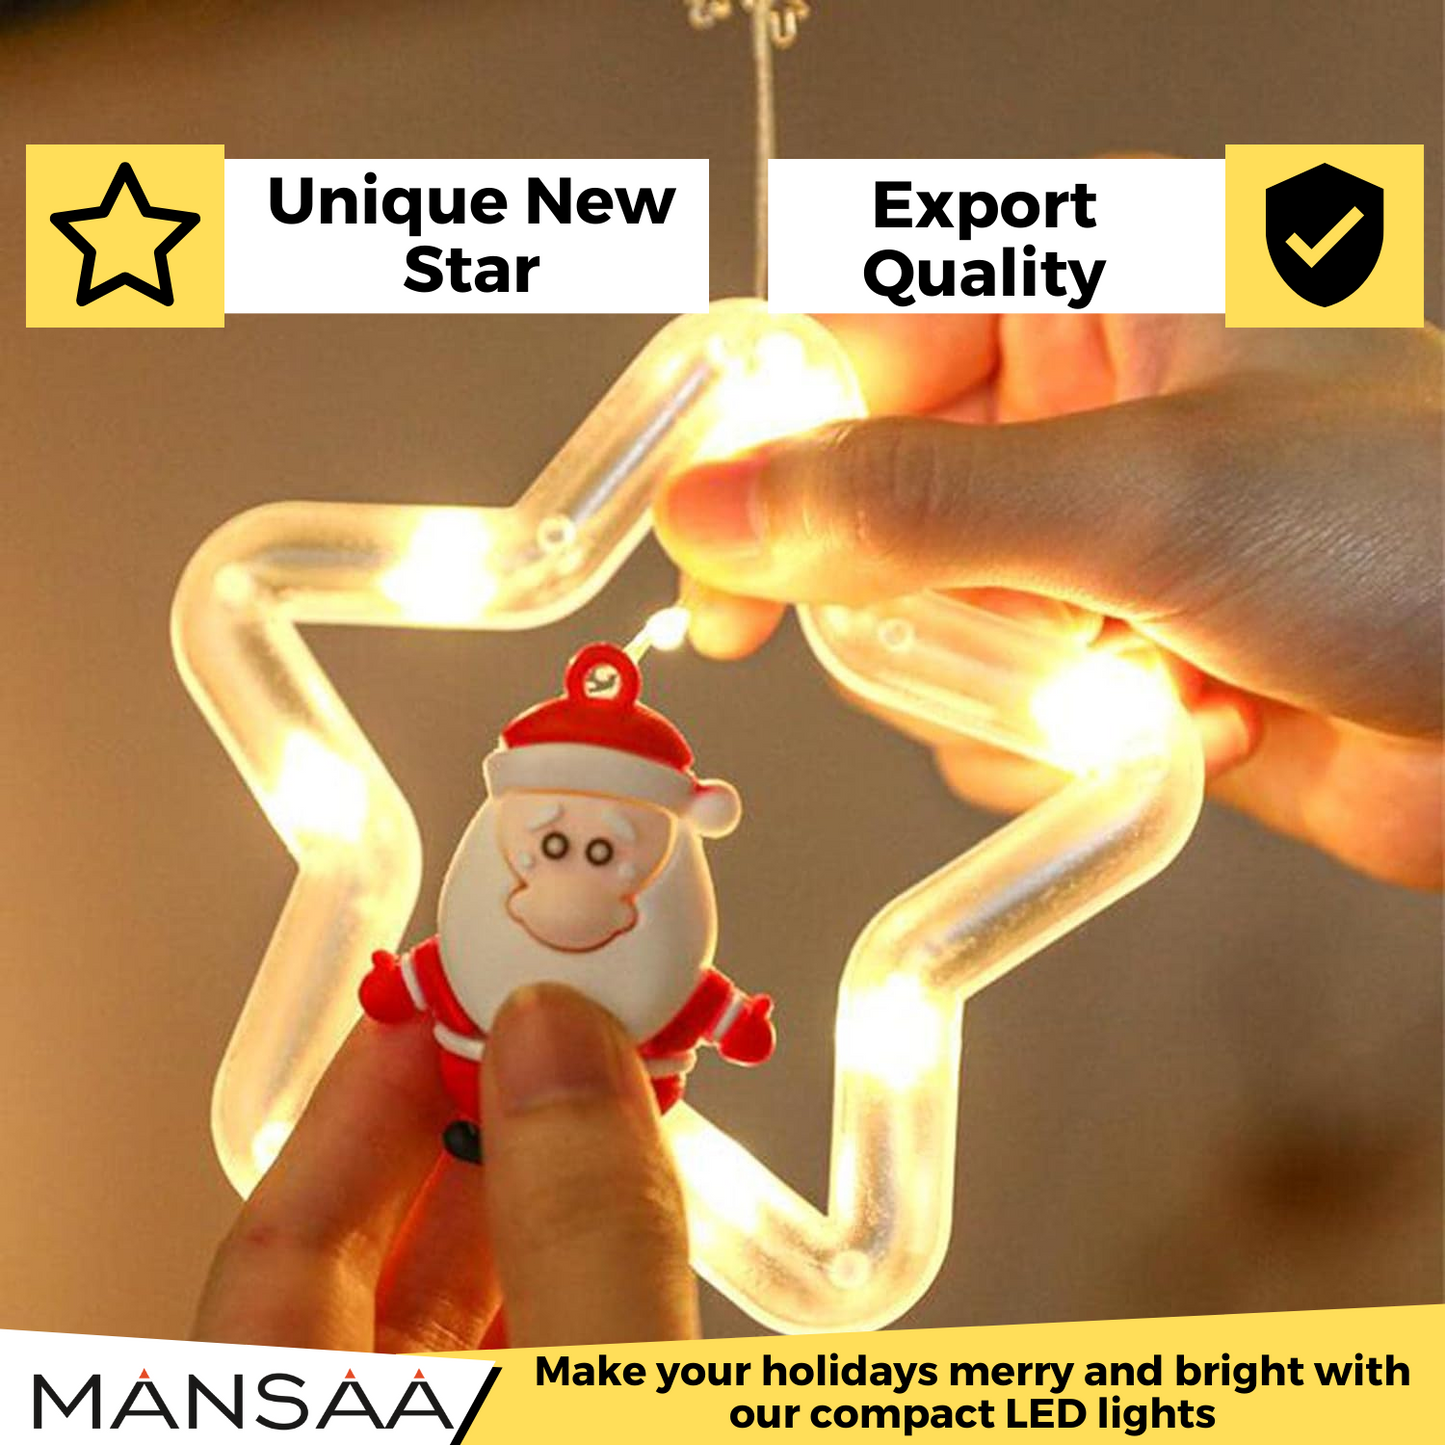 Star Christmas Lights, 4 Meter Direct Plug Christmas Light String with 10 Cute icons | DIY Christmas Decor |8 Blinking Mode | Decorative Fairy curtain Lights for Indoor Outdoor Party Bedroom Home Decor | Warm White